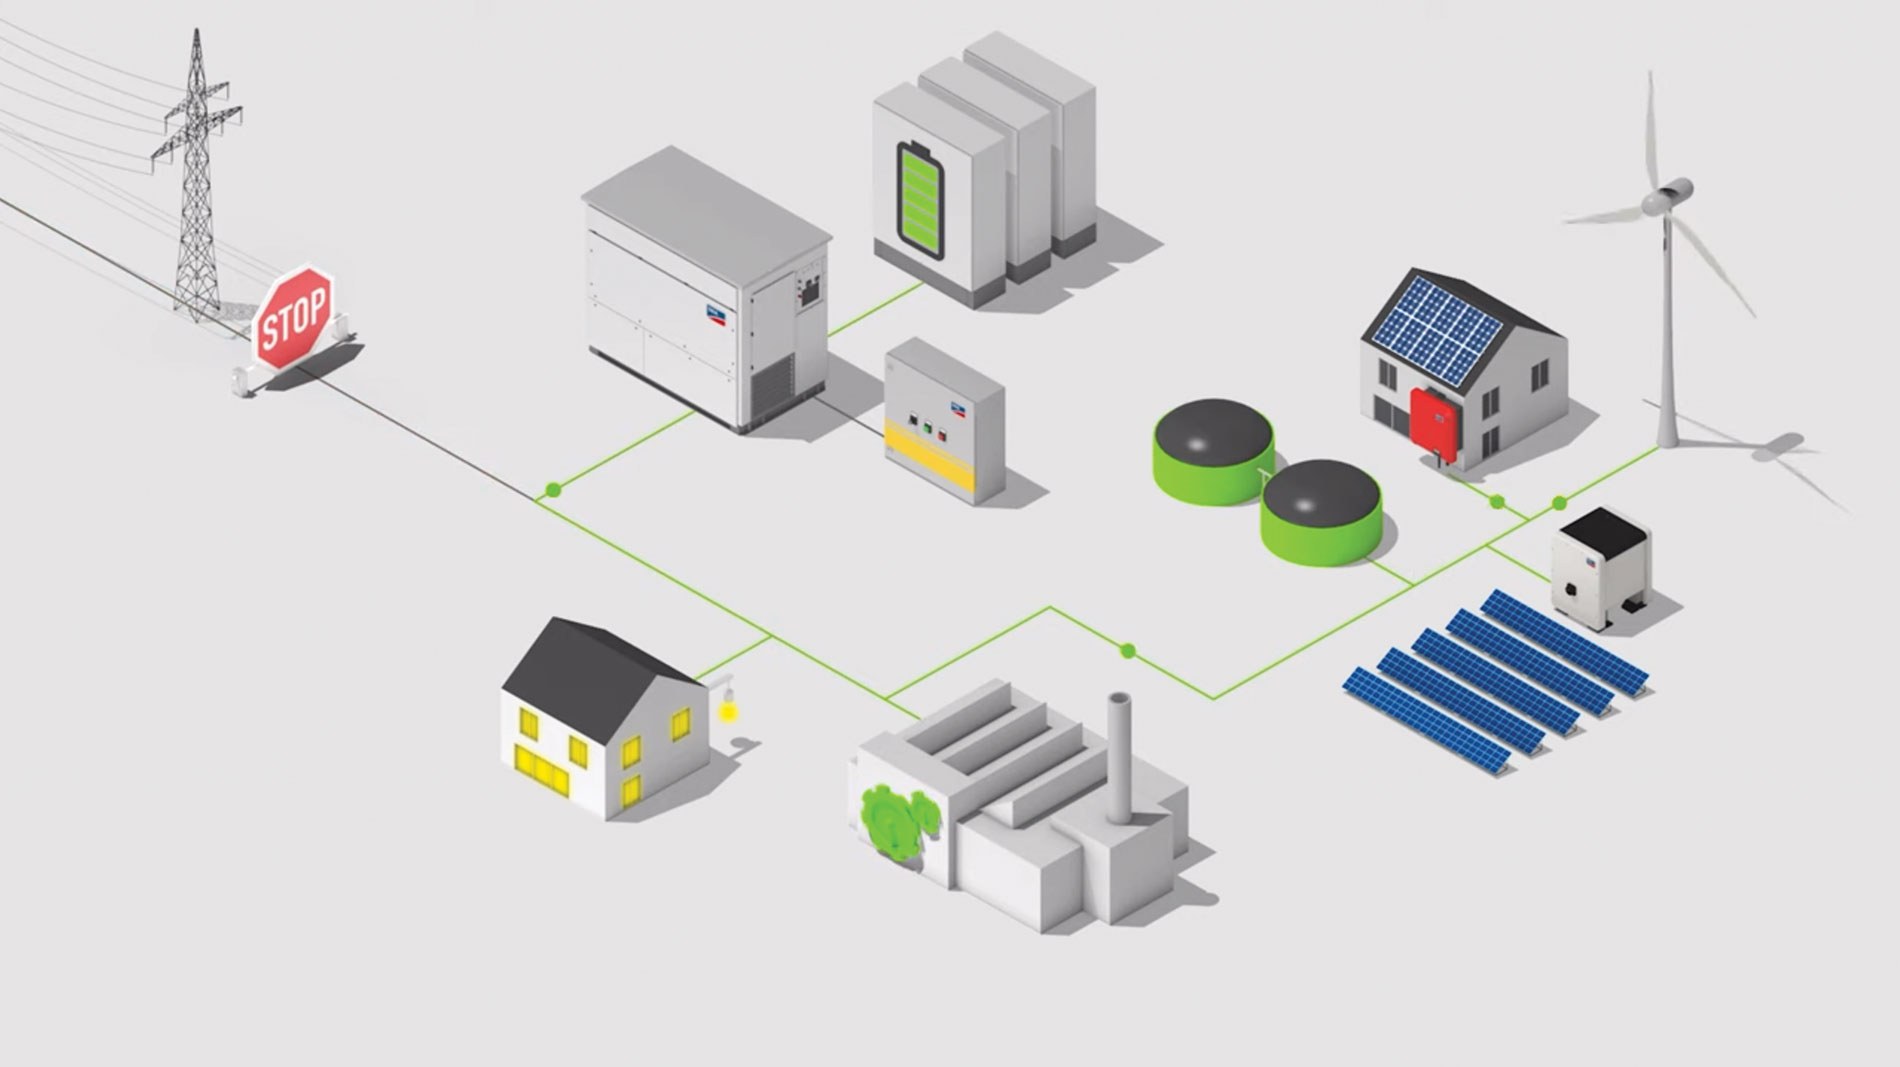 Illustration of a city with solar panels, wind turbines, a power tower, and battery storage. Image by SMA America.